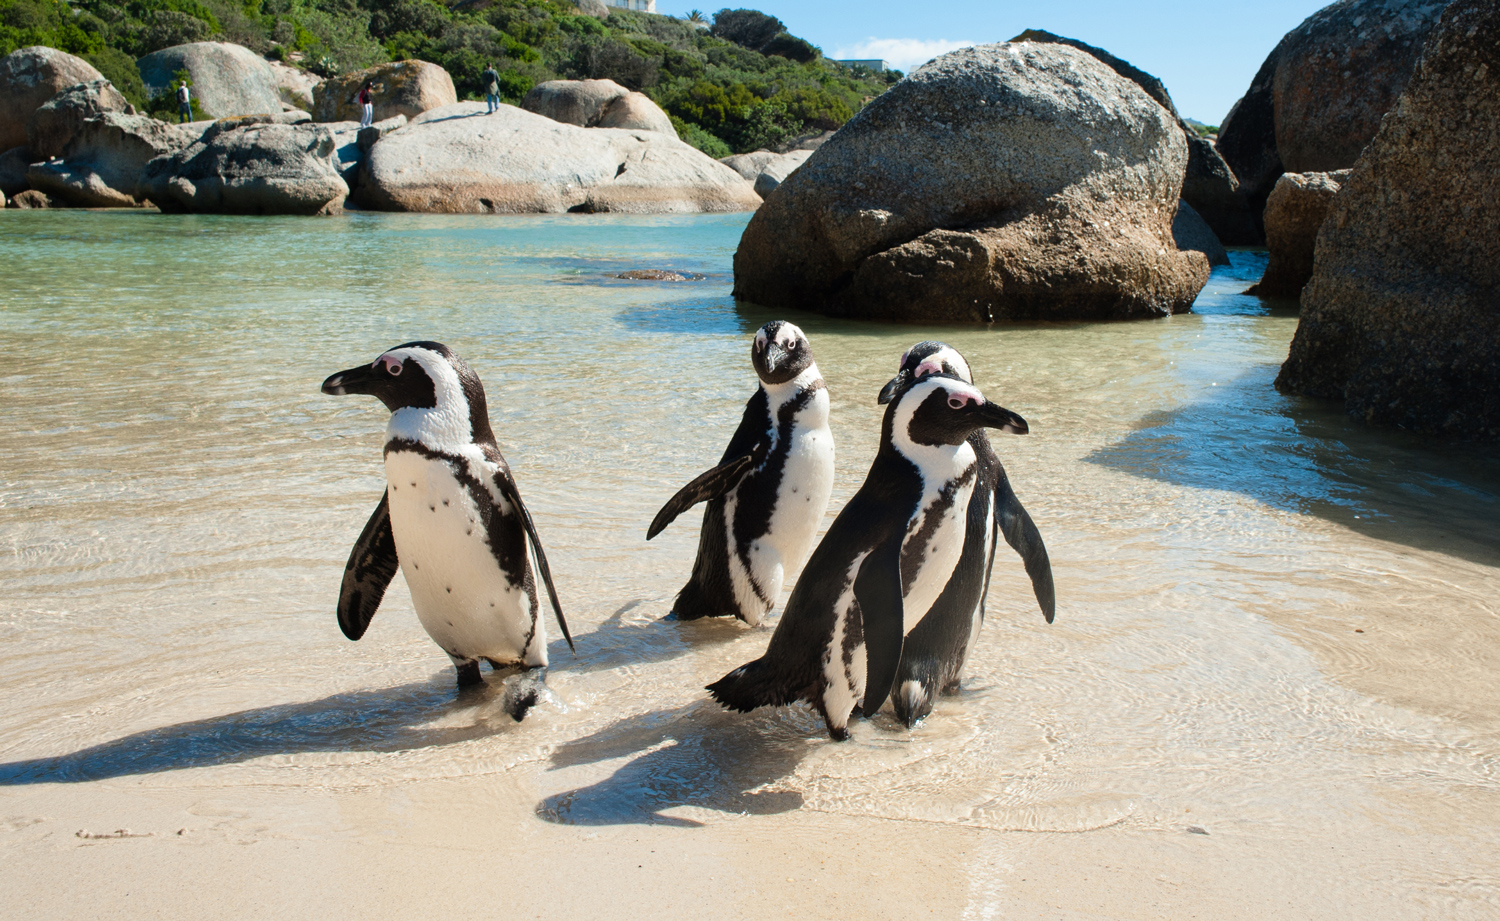 Four penguins stand on a beach with boulders and greenery in the background.